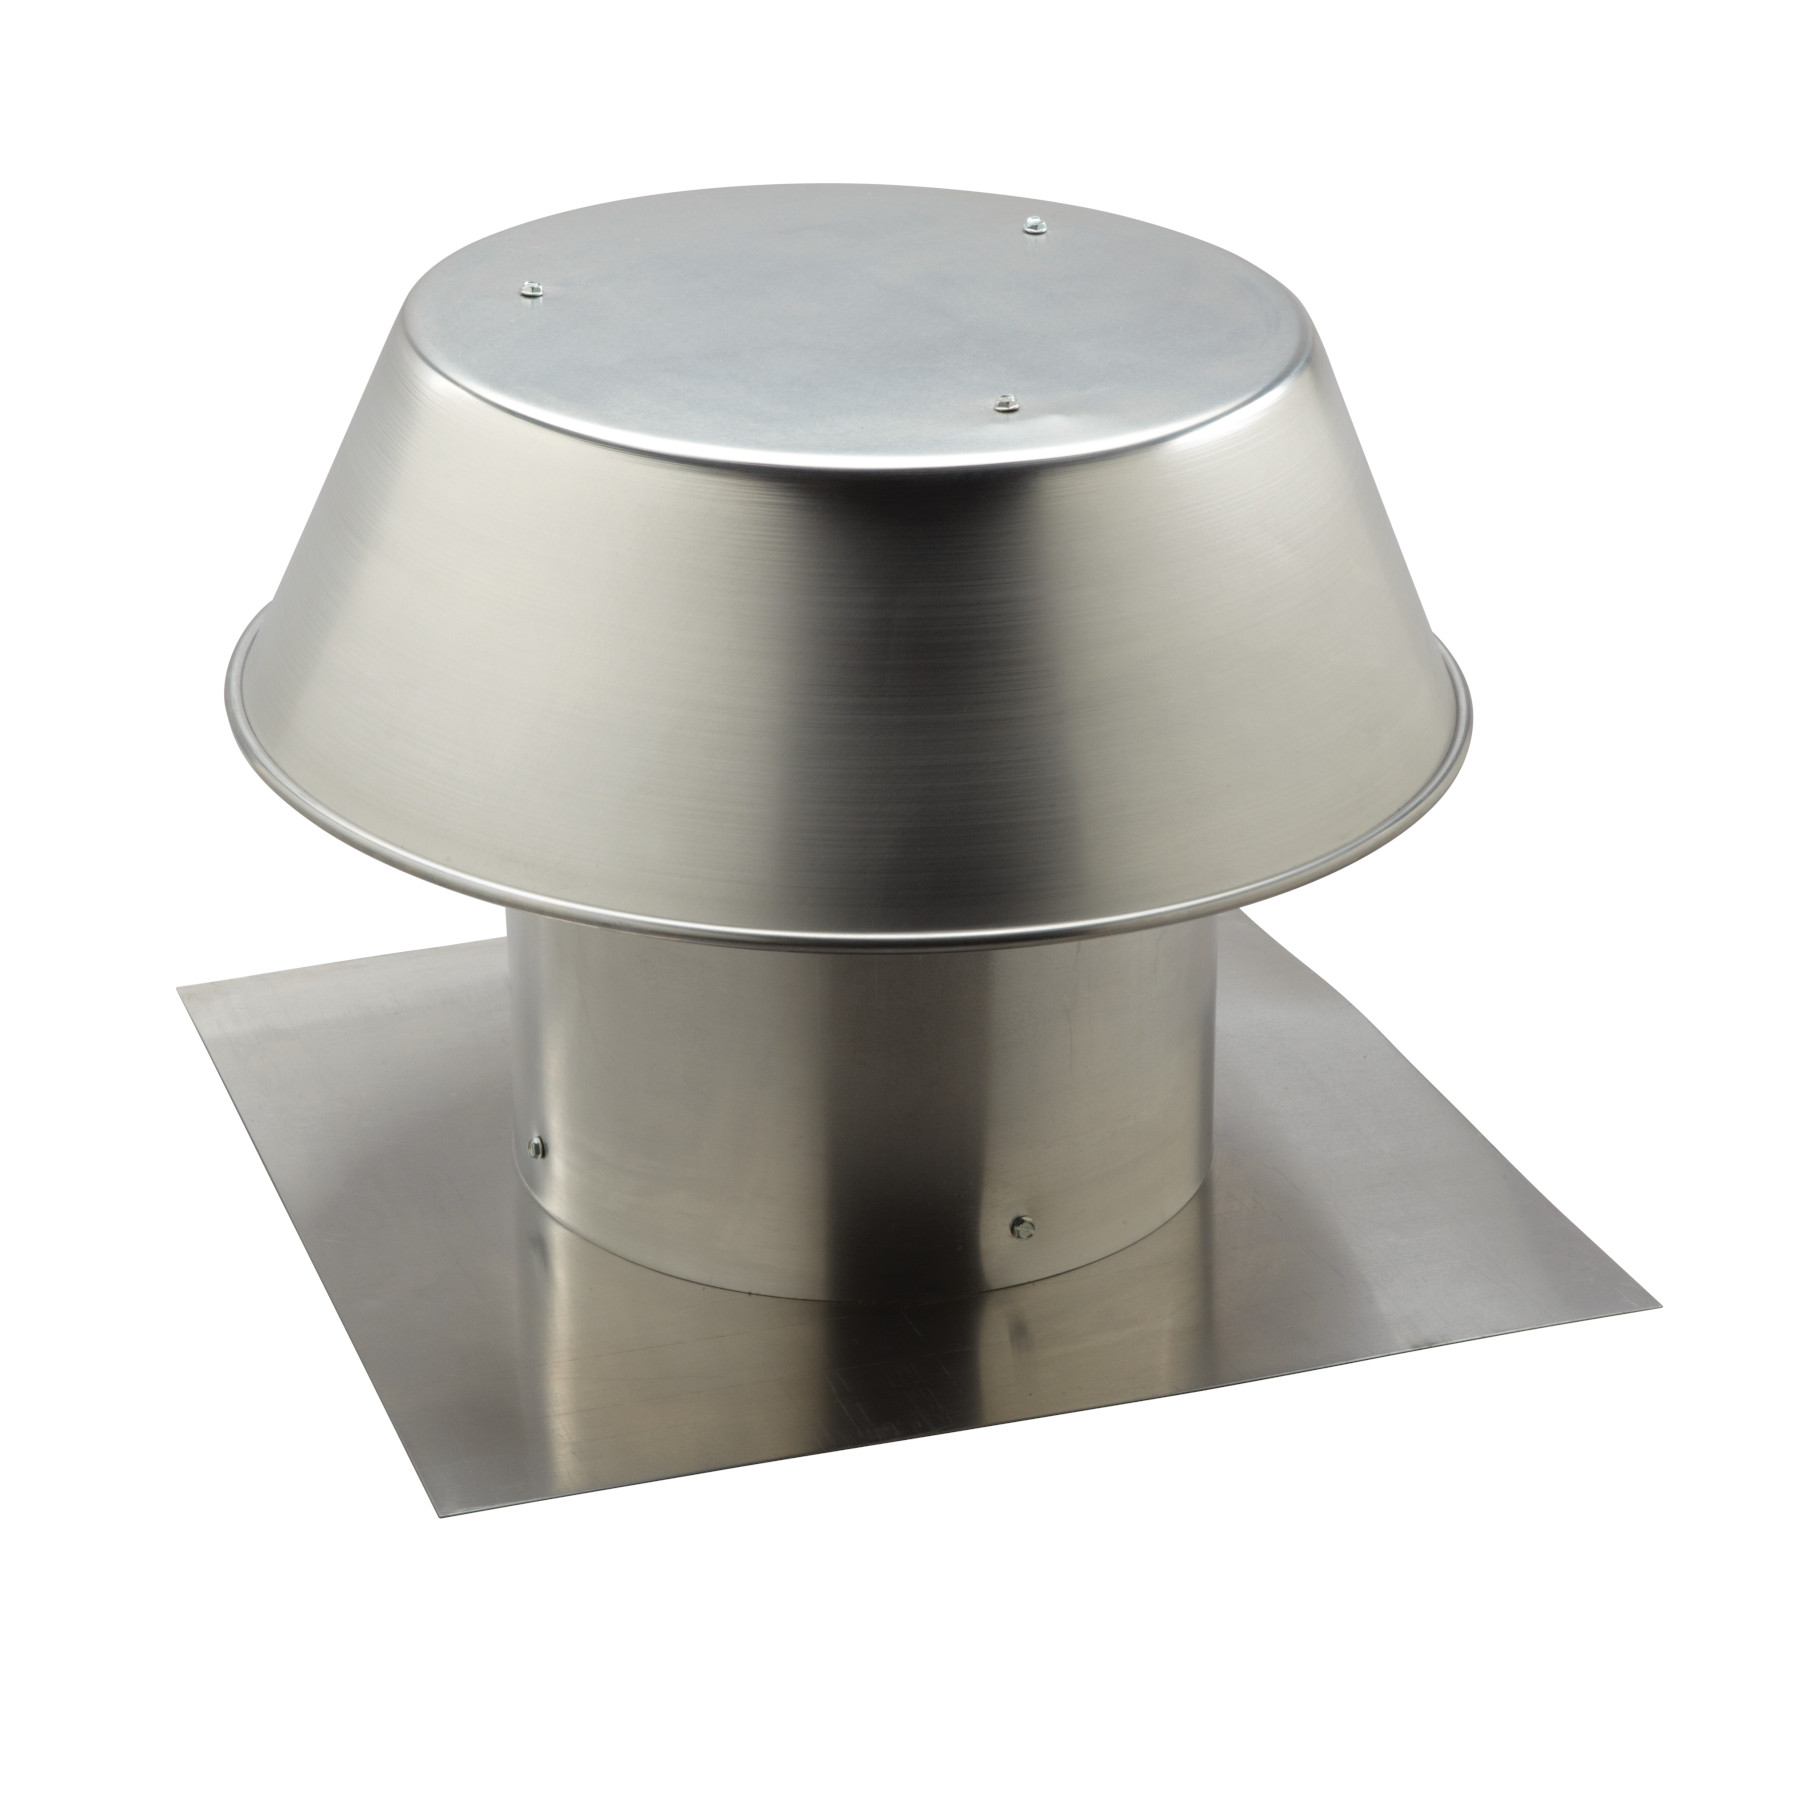 **DISCONTINUED** Broan-NuTone® Roof Cap, For Flat Roof, Aluminum, Up to 12-Inch Round Duct